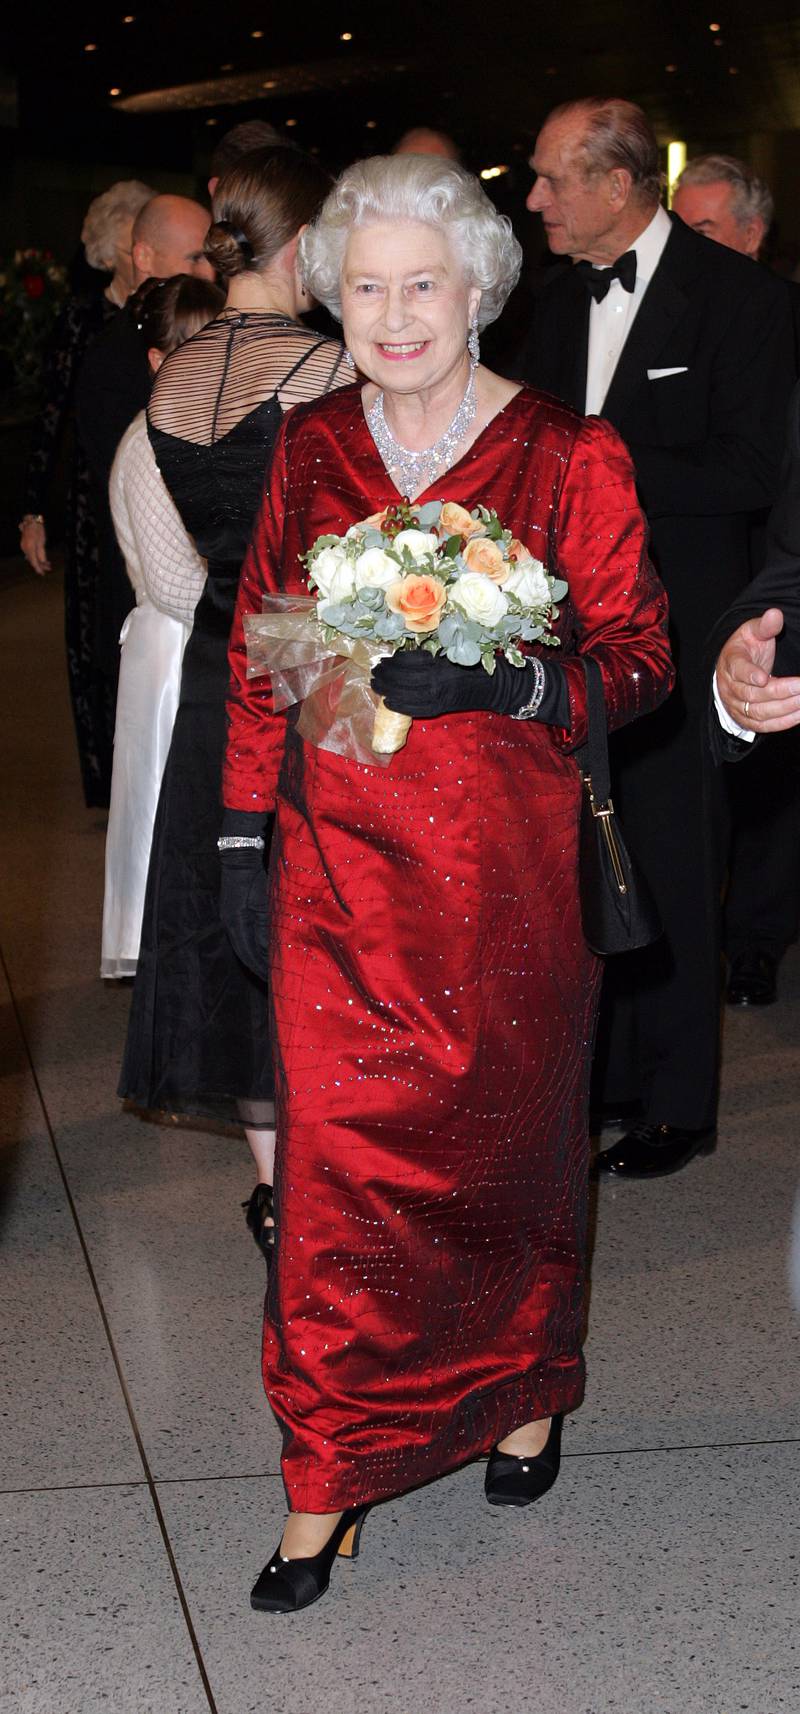 Queen Elizabeth II, wearing a red gown with crystal detailing, attends the Royal Variety Performance in Cardiff, Wales on November 21, 2005. Getty Images 